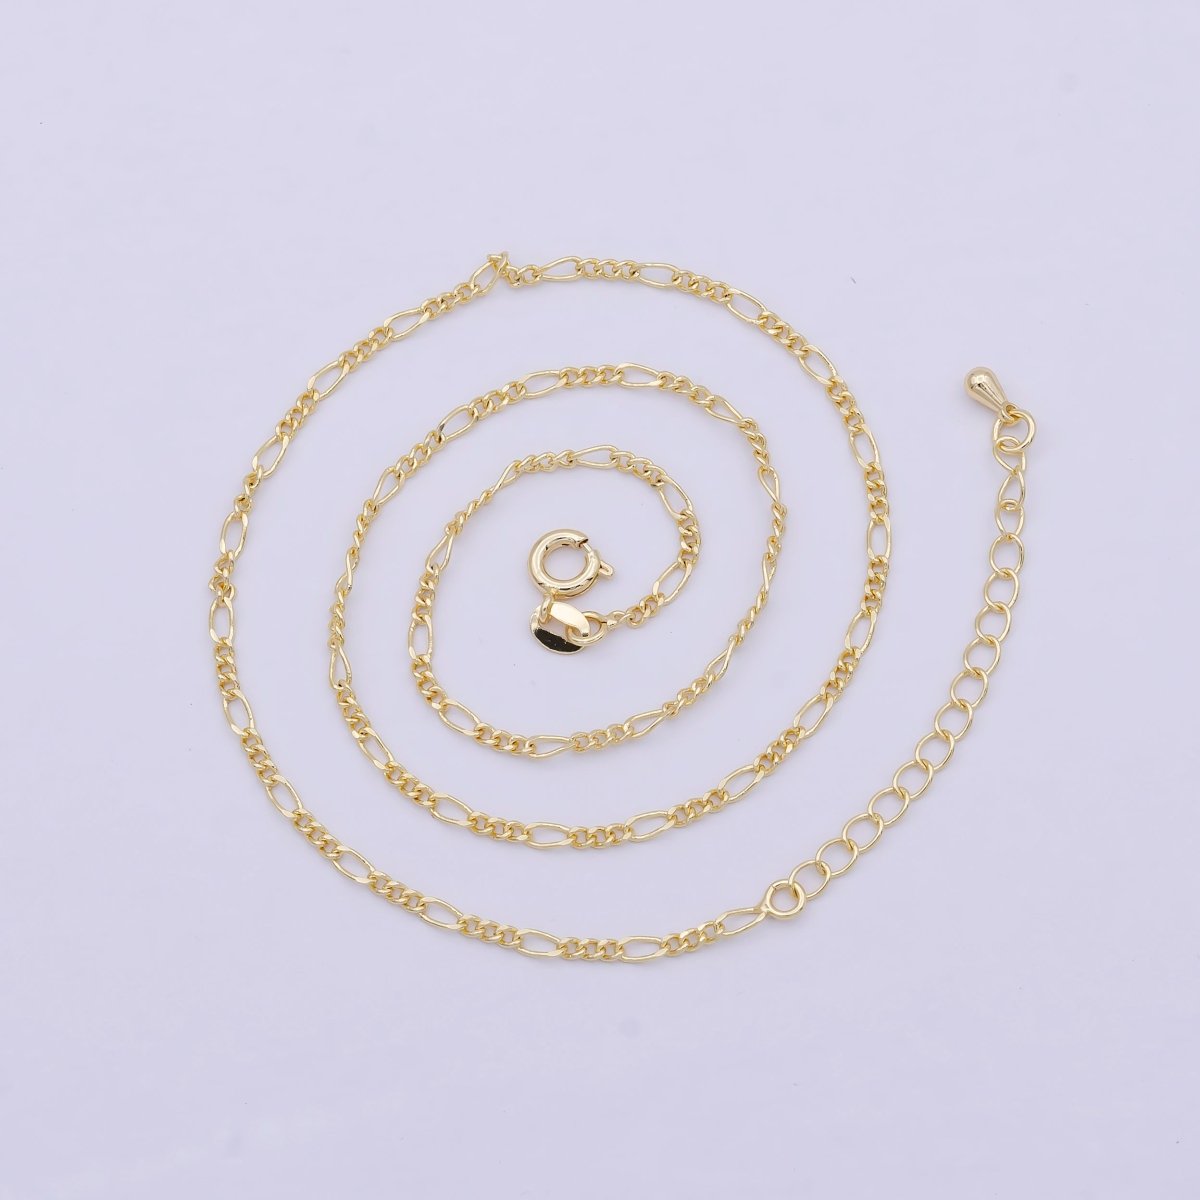 2mm 18k gold Filled figaro chain - Necklace for layering Women stacking Necklace 15.5 inches + 2 inch chain extender | WA-836 Clearance Pricing - DLUXCA